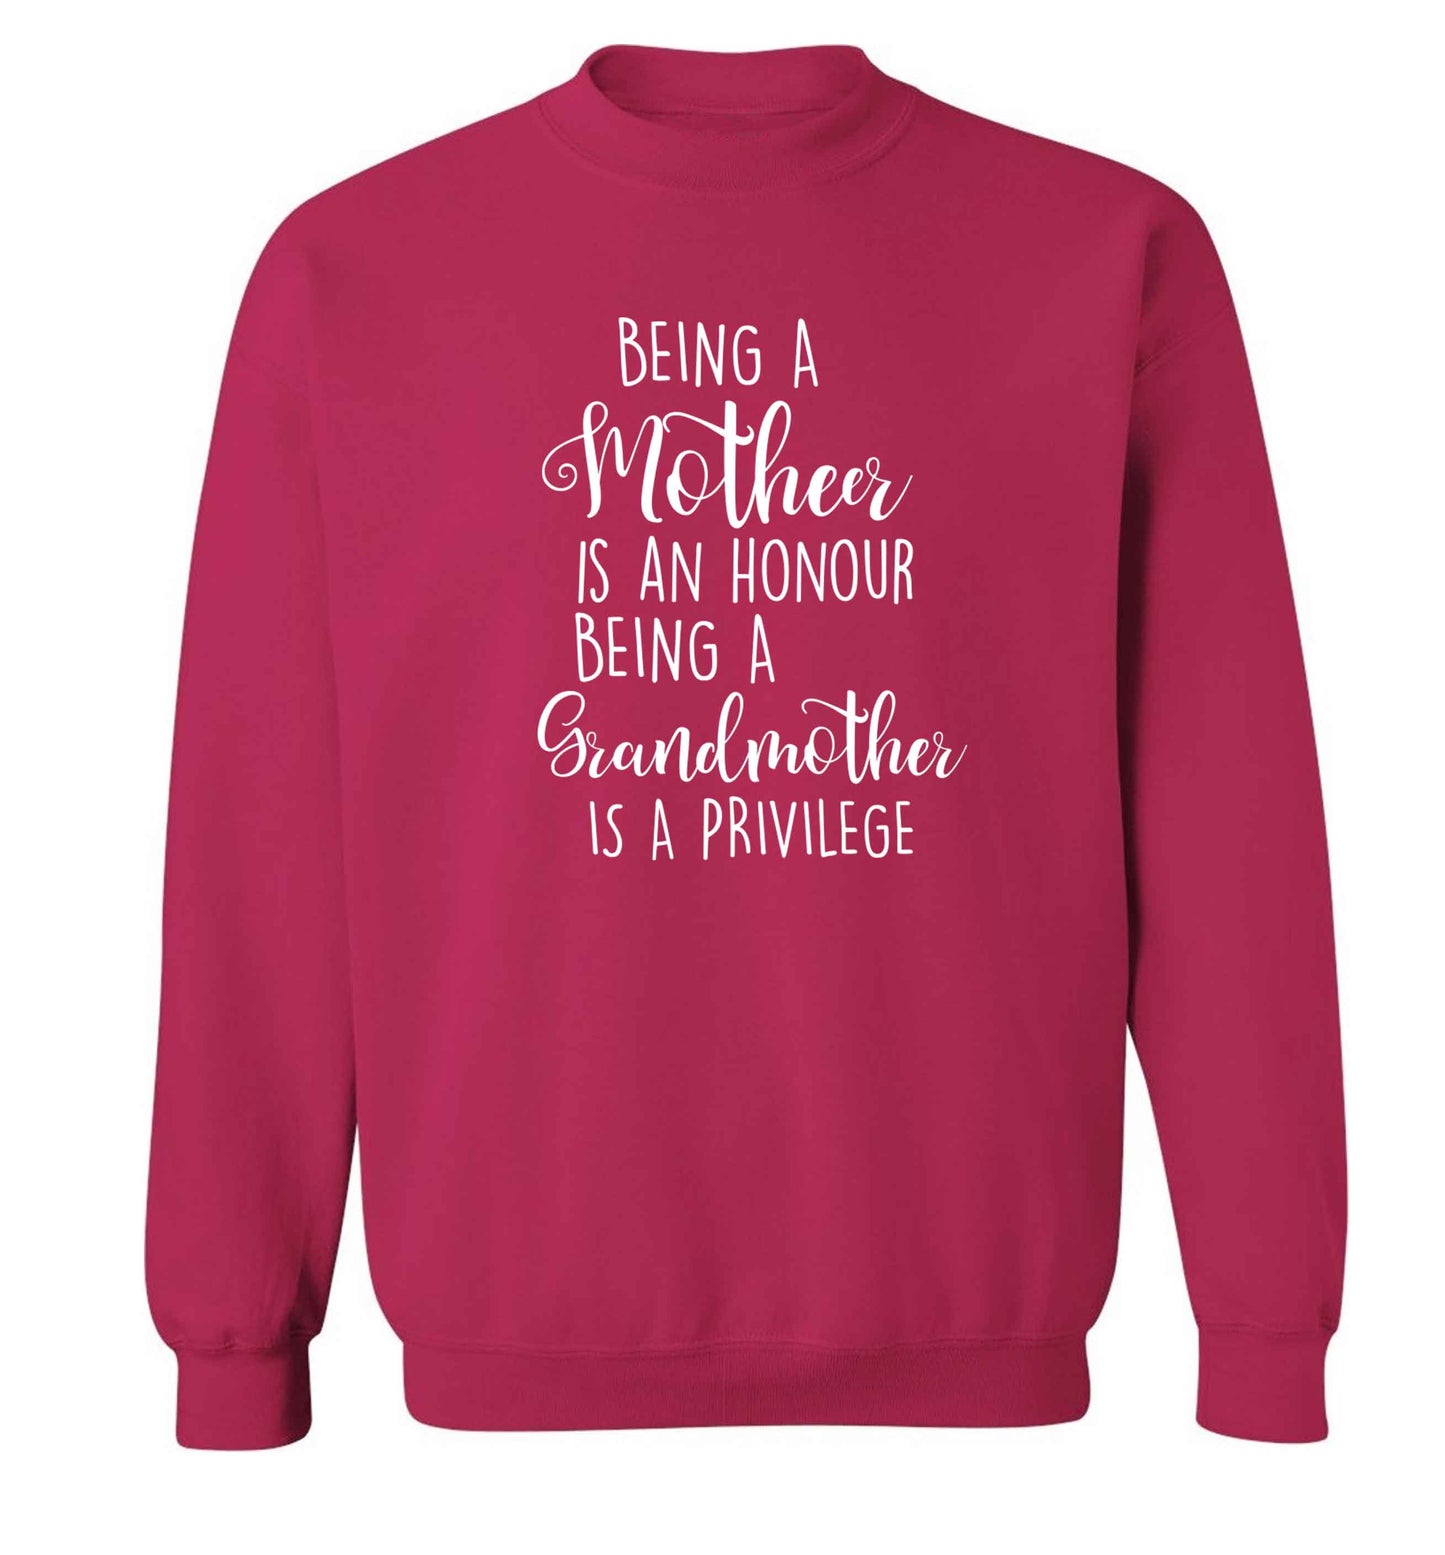 Being a mother is an honour being an grandmother is a privilege Adult's unisex pink Sweater 2XL